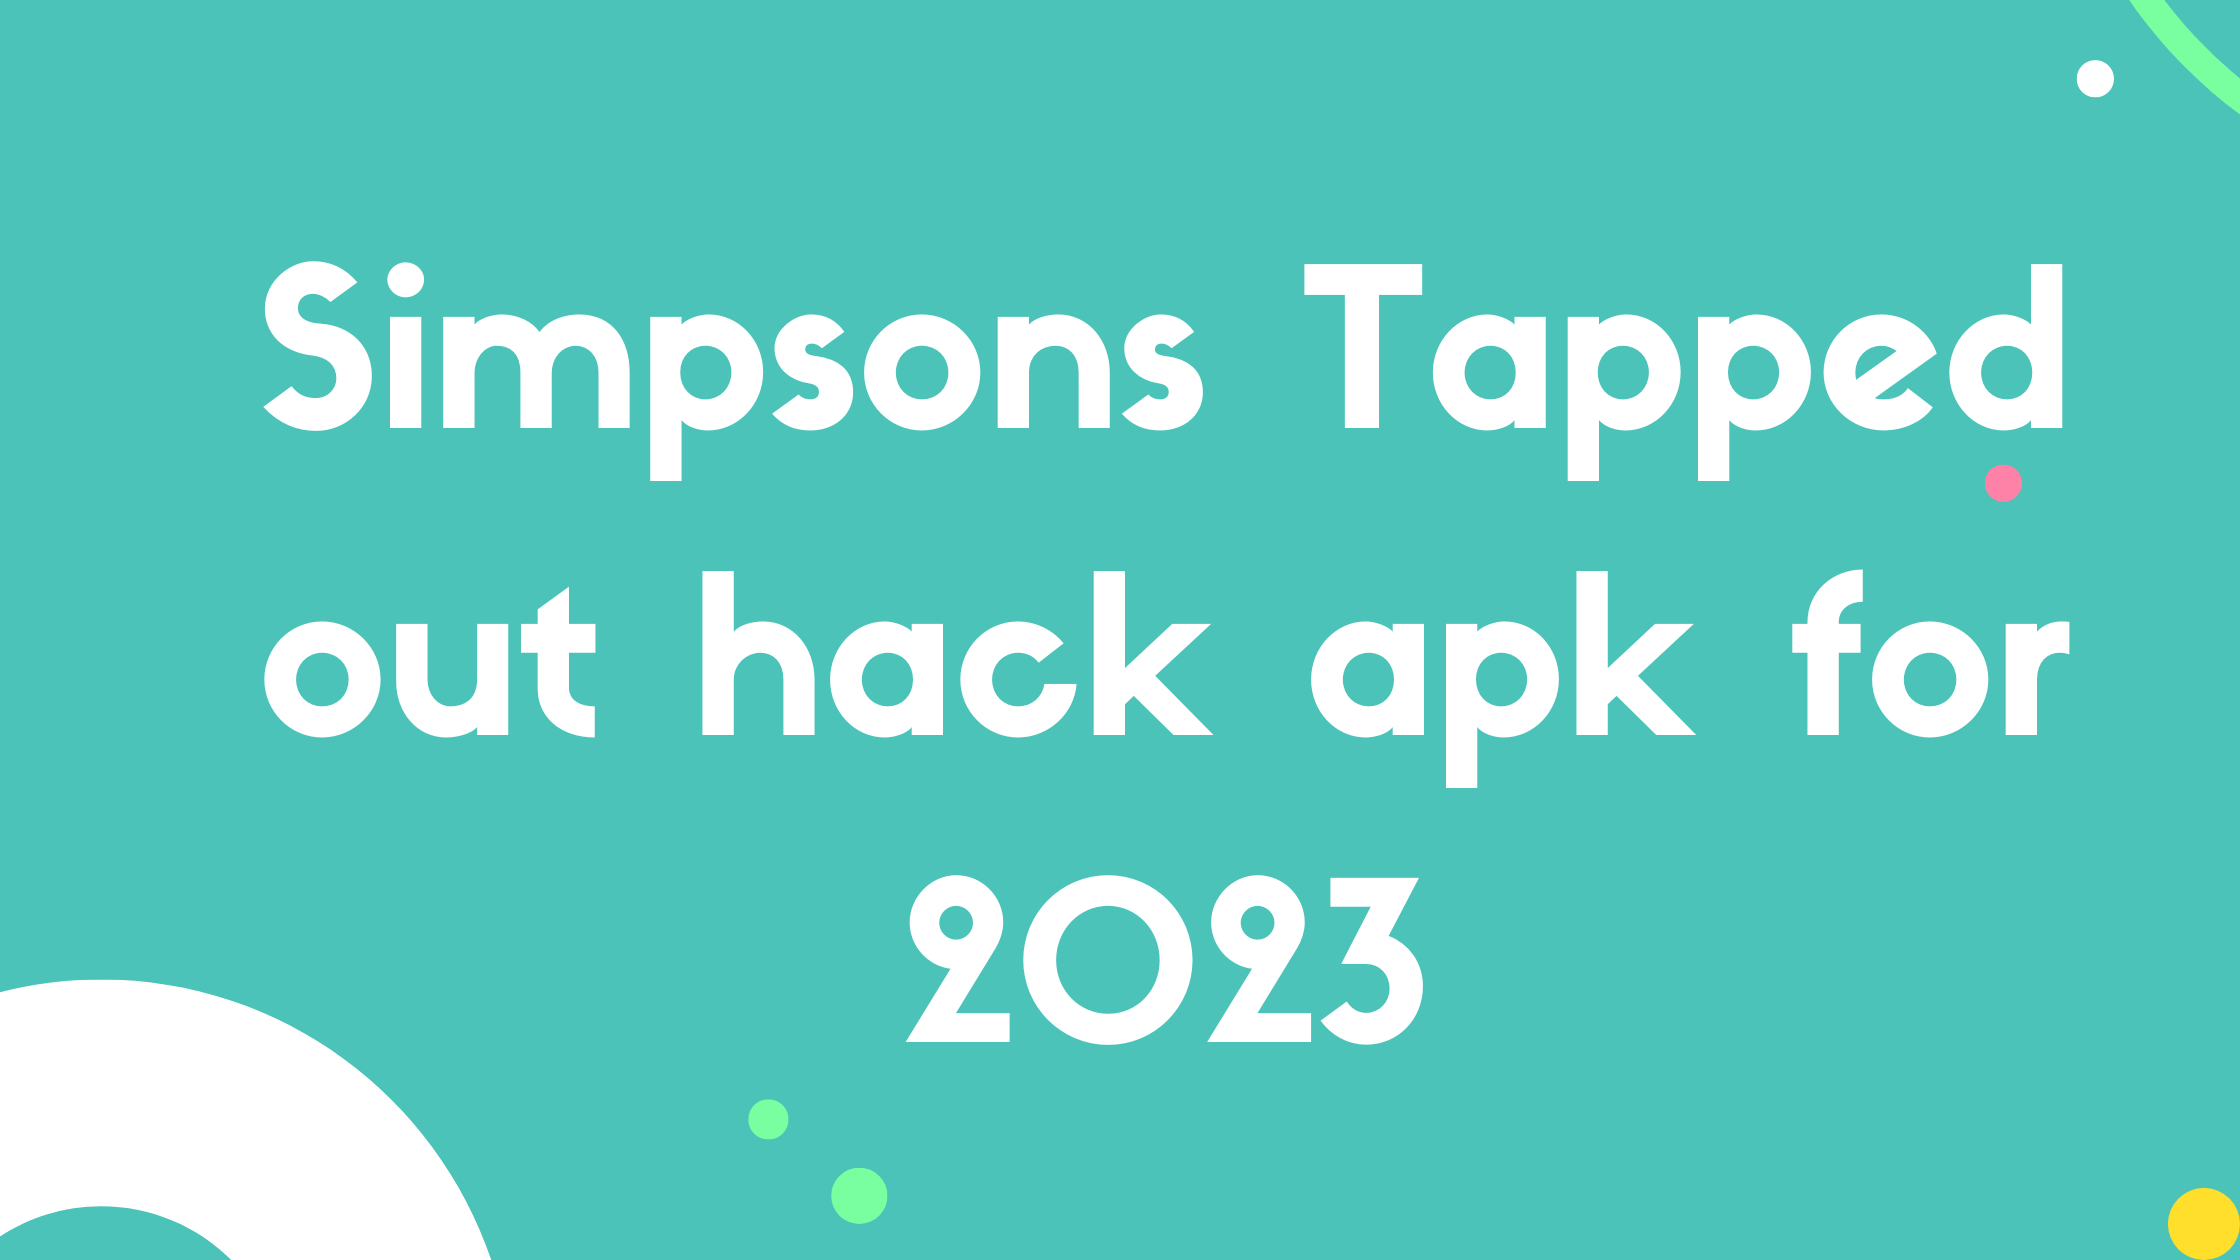 Simpsons Tapped out hack apk for 2023